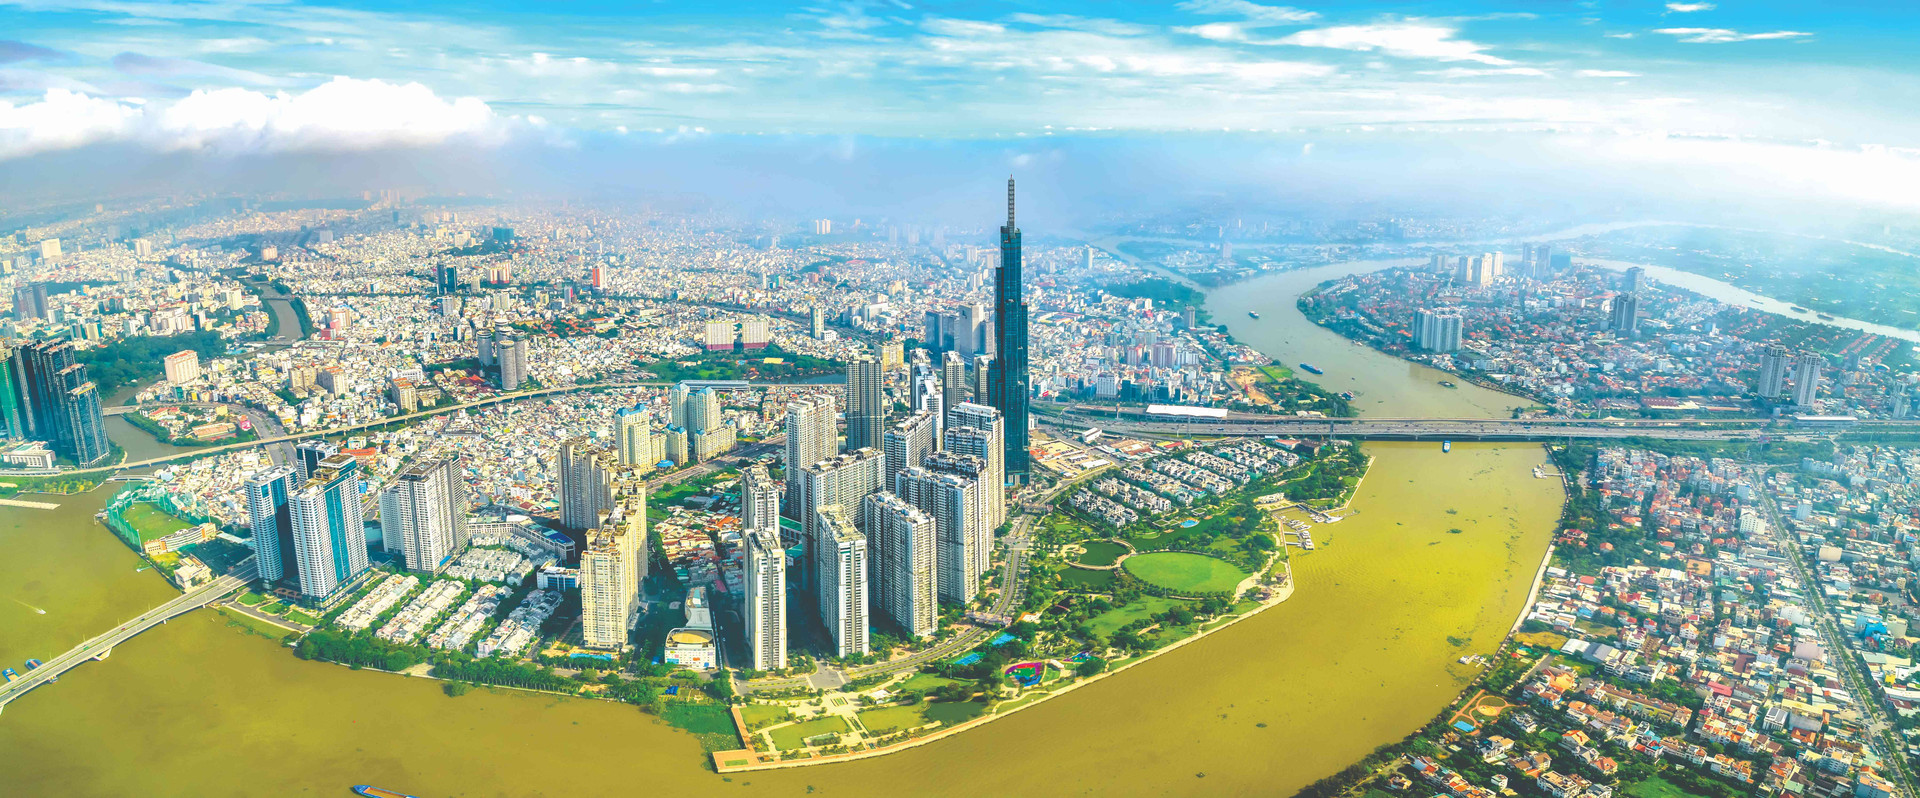 aerial-view-ho-chi-minh-city-skyline-skyscrapers-center-heart-business-downtown-compressed.jpeg